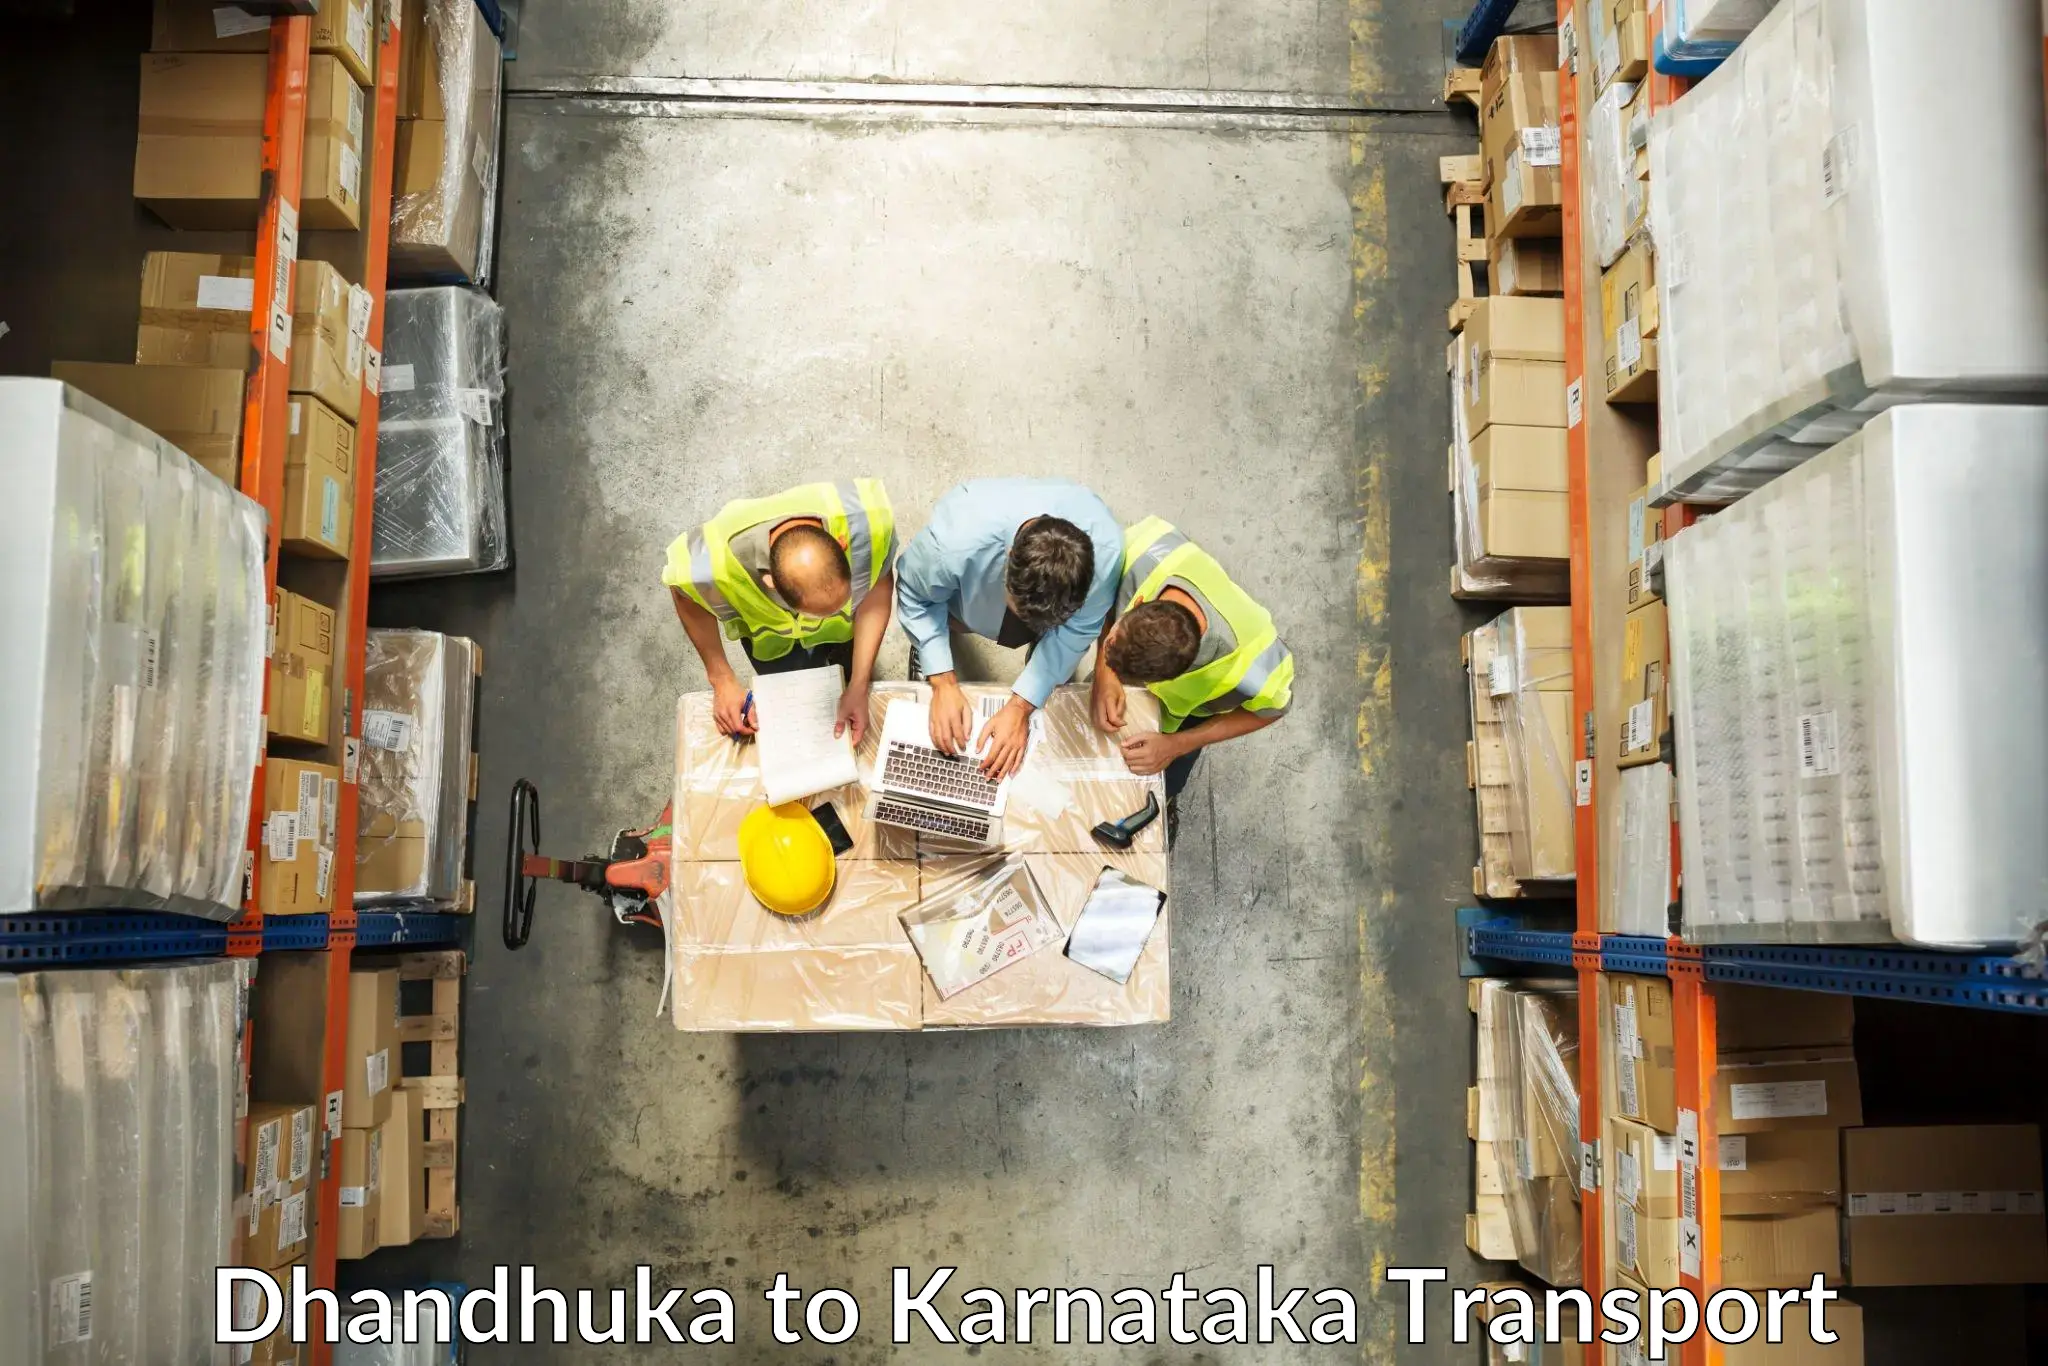 Truck transport companies in India Dhandhuka to Manipal